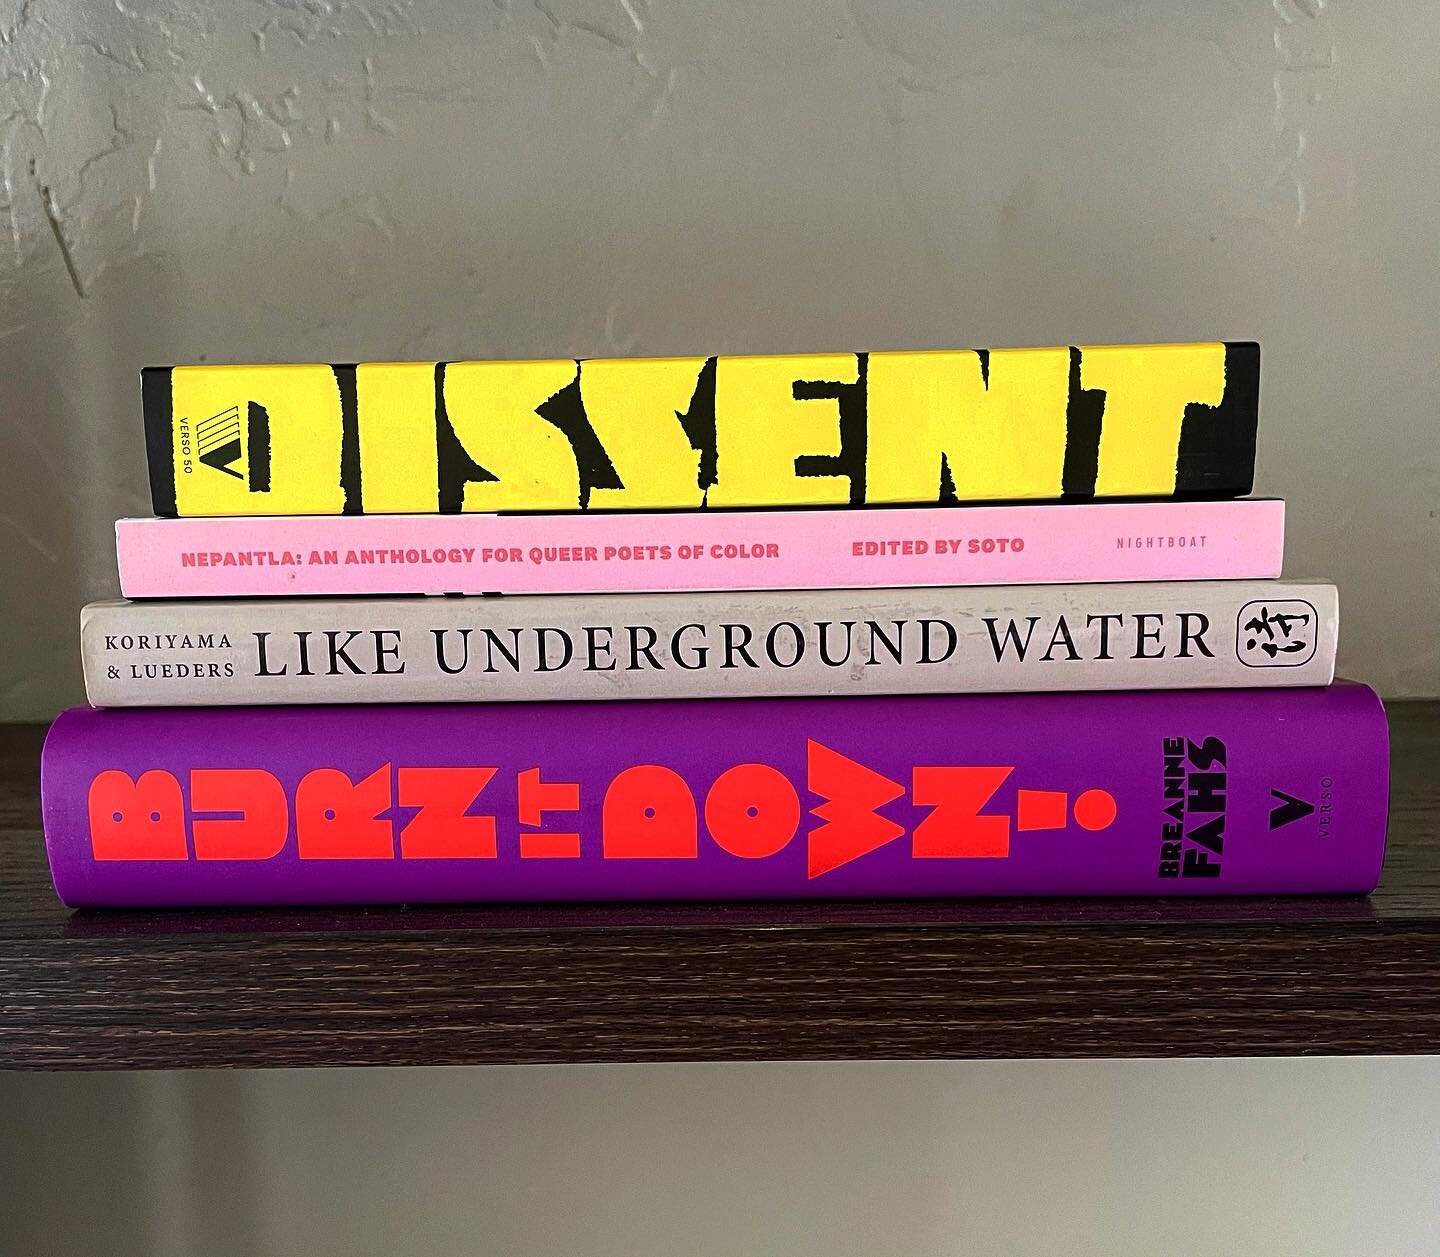 Here are some anthologies&mdash;poetry or otherwise&mdash;that we&rsquo;ve recently enjoyed or plan to enjoy very soon. Check them out if you can!⁣
.⁣
&bull;The Verso Book of Dissent from @versobooks 
.⁣
&bull;Nepantla: An Anthology for Queer Poets o